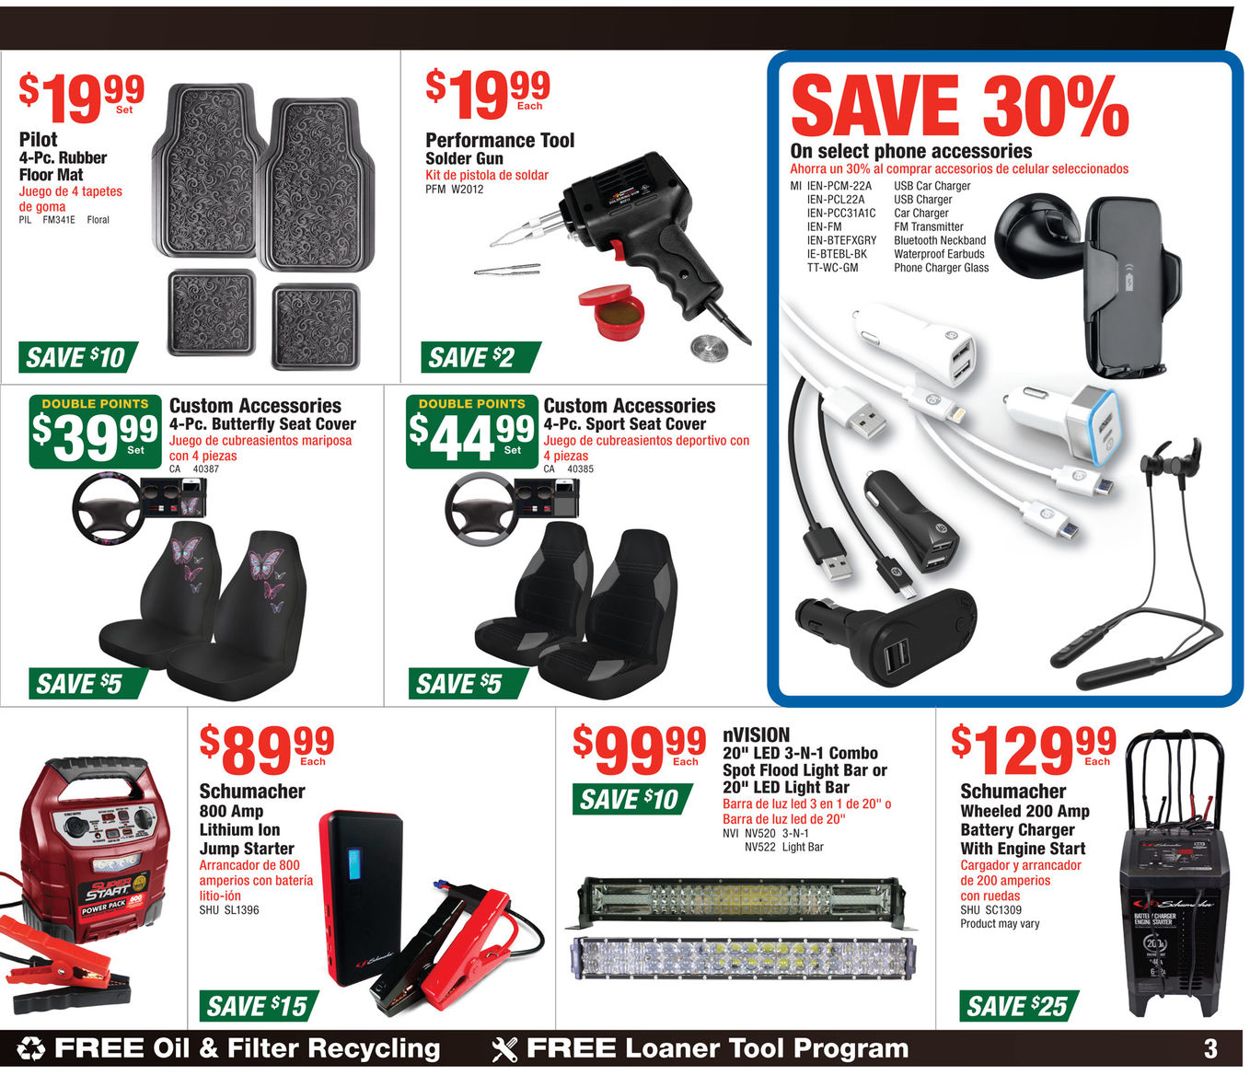 Catalogue O'Reilly Auto Parts - Black Friday Sale Ad 2019 from 11/28/2019